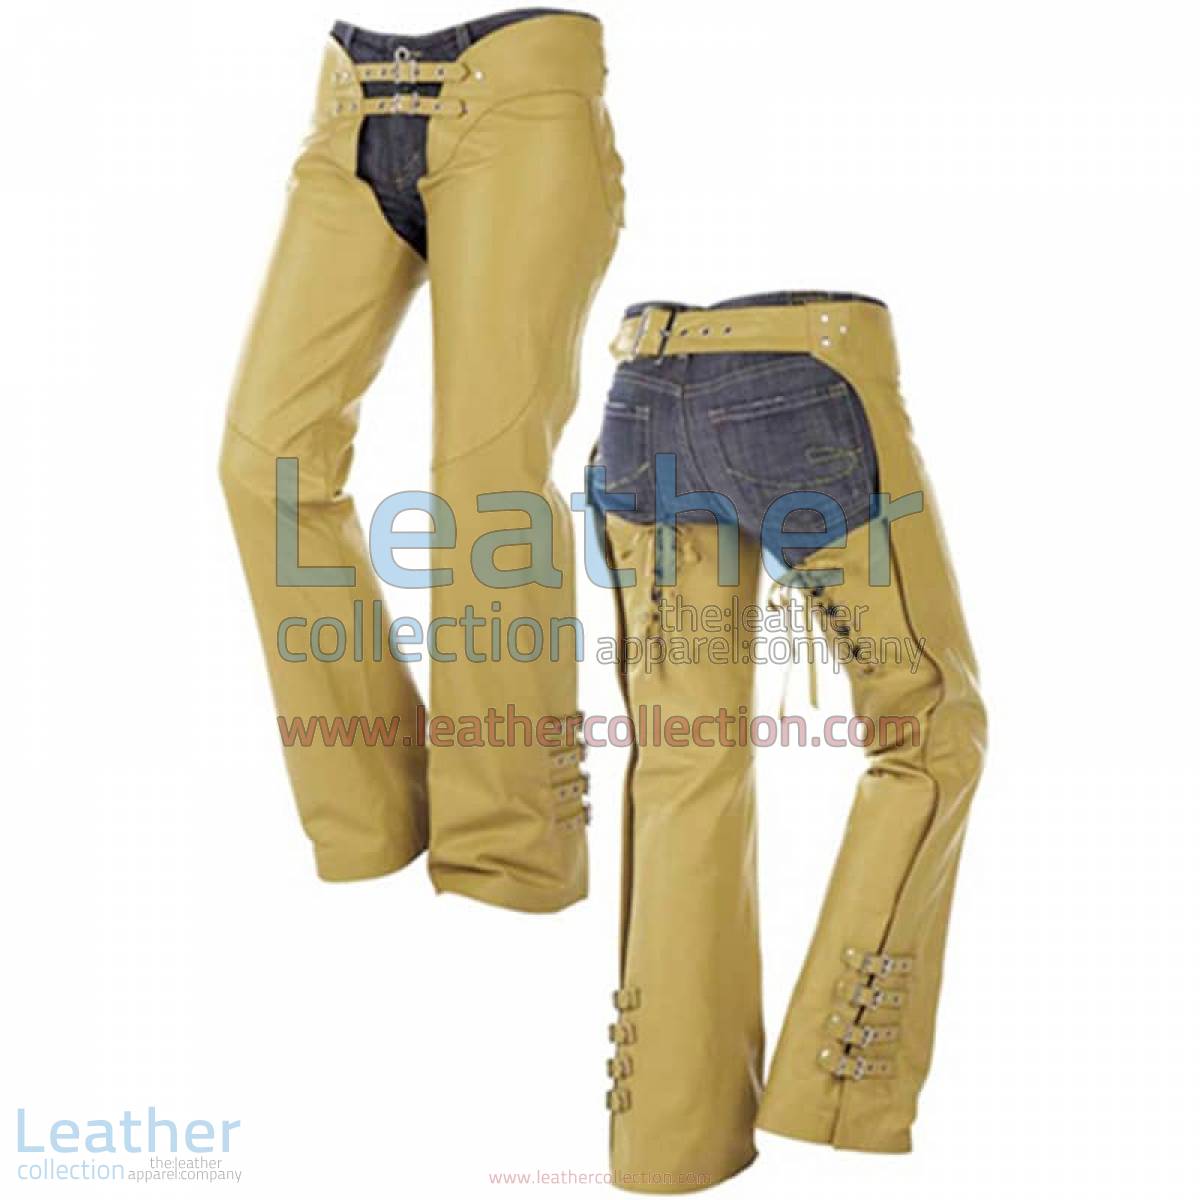 Buckles on Legs Leather Cowboy Chaps | leather cowboy chaps